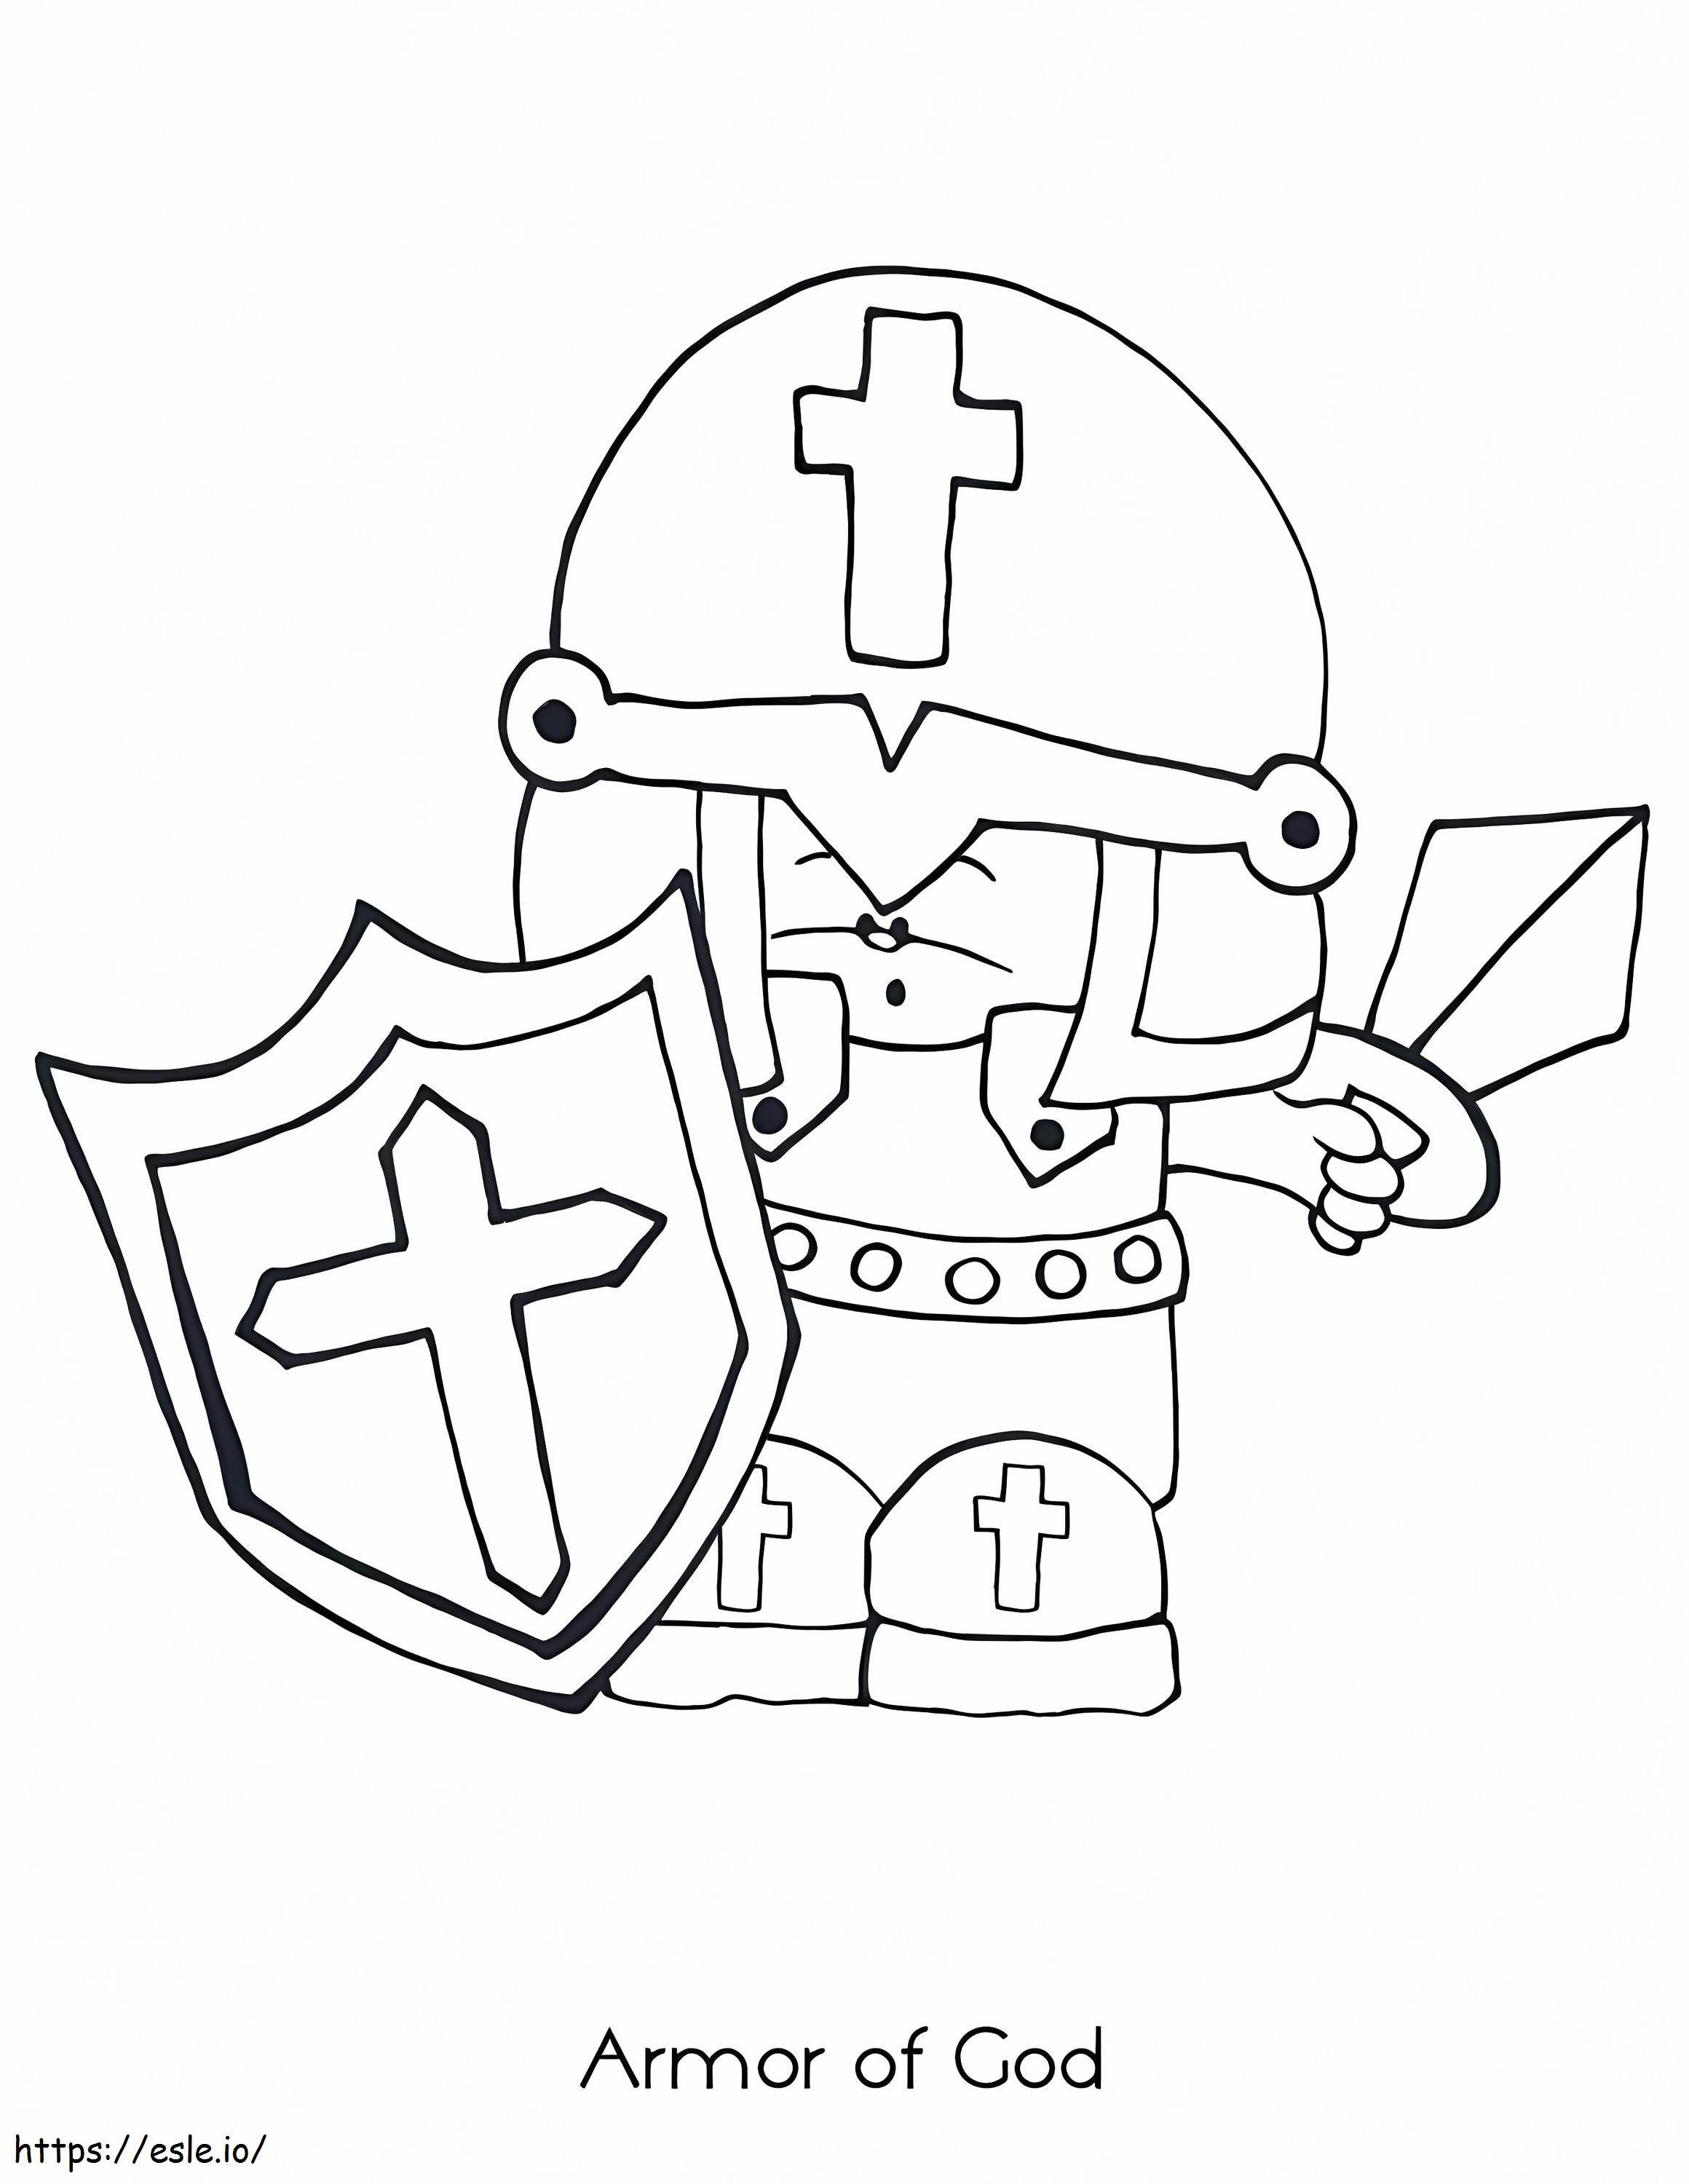 Tiny Armor Of God coloring page